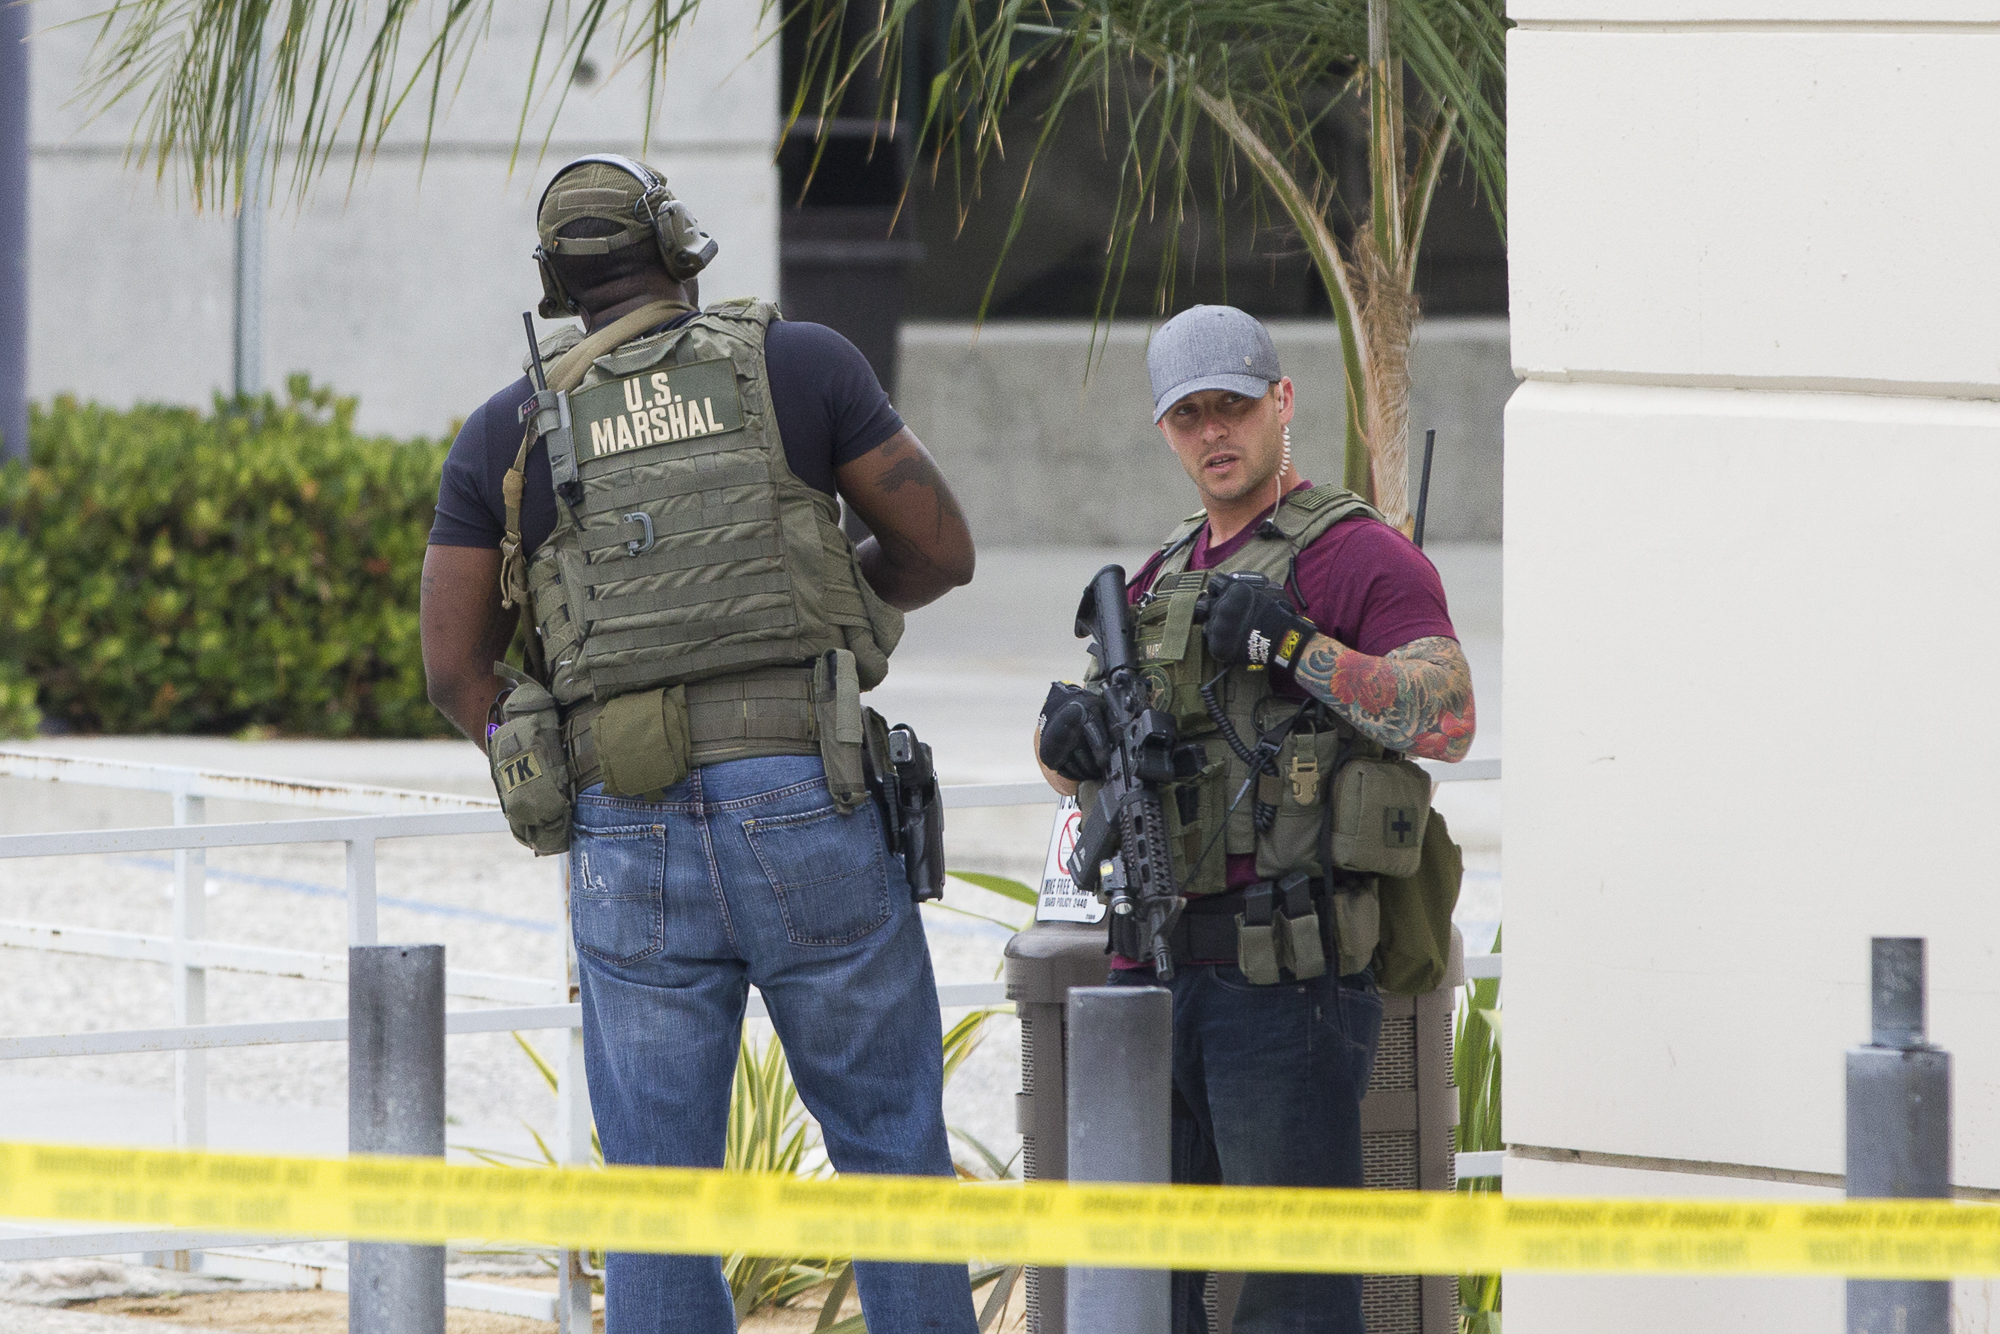  U.S. Marshals search for a possible second shooter on June 7, 2013 in front of the Business Building at Santa Monica College in Santa Monica California. It turned out that the gunman was alone. In total six people, including the shooter, were killed